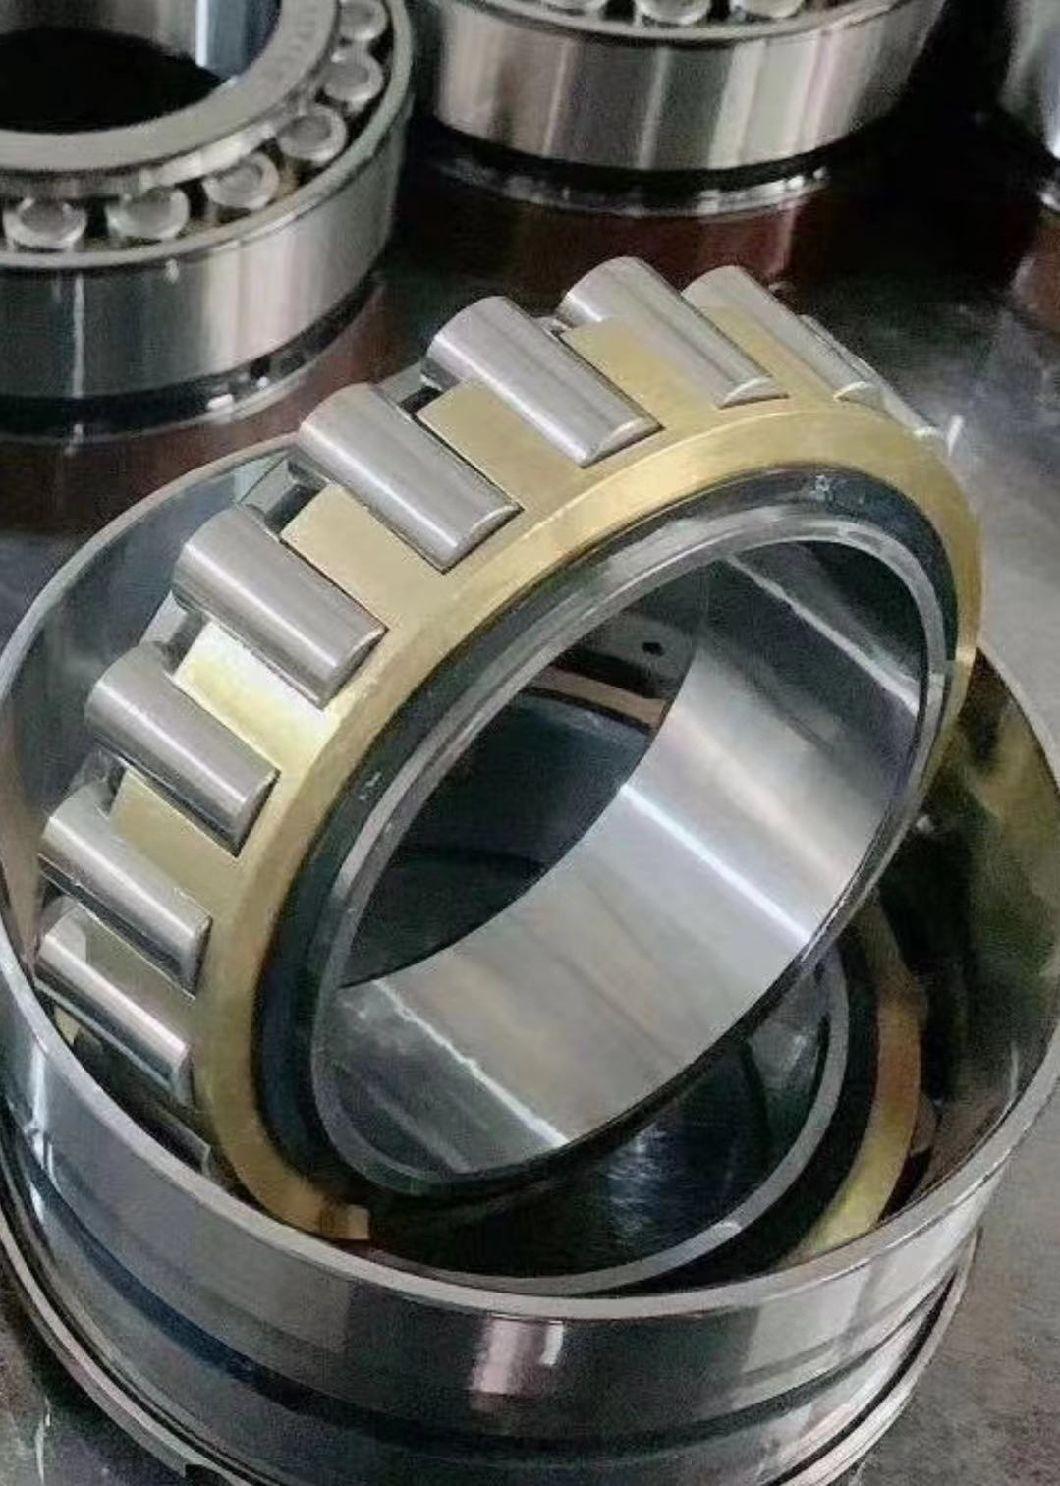 Tapered Roller Bearing 32218